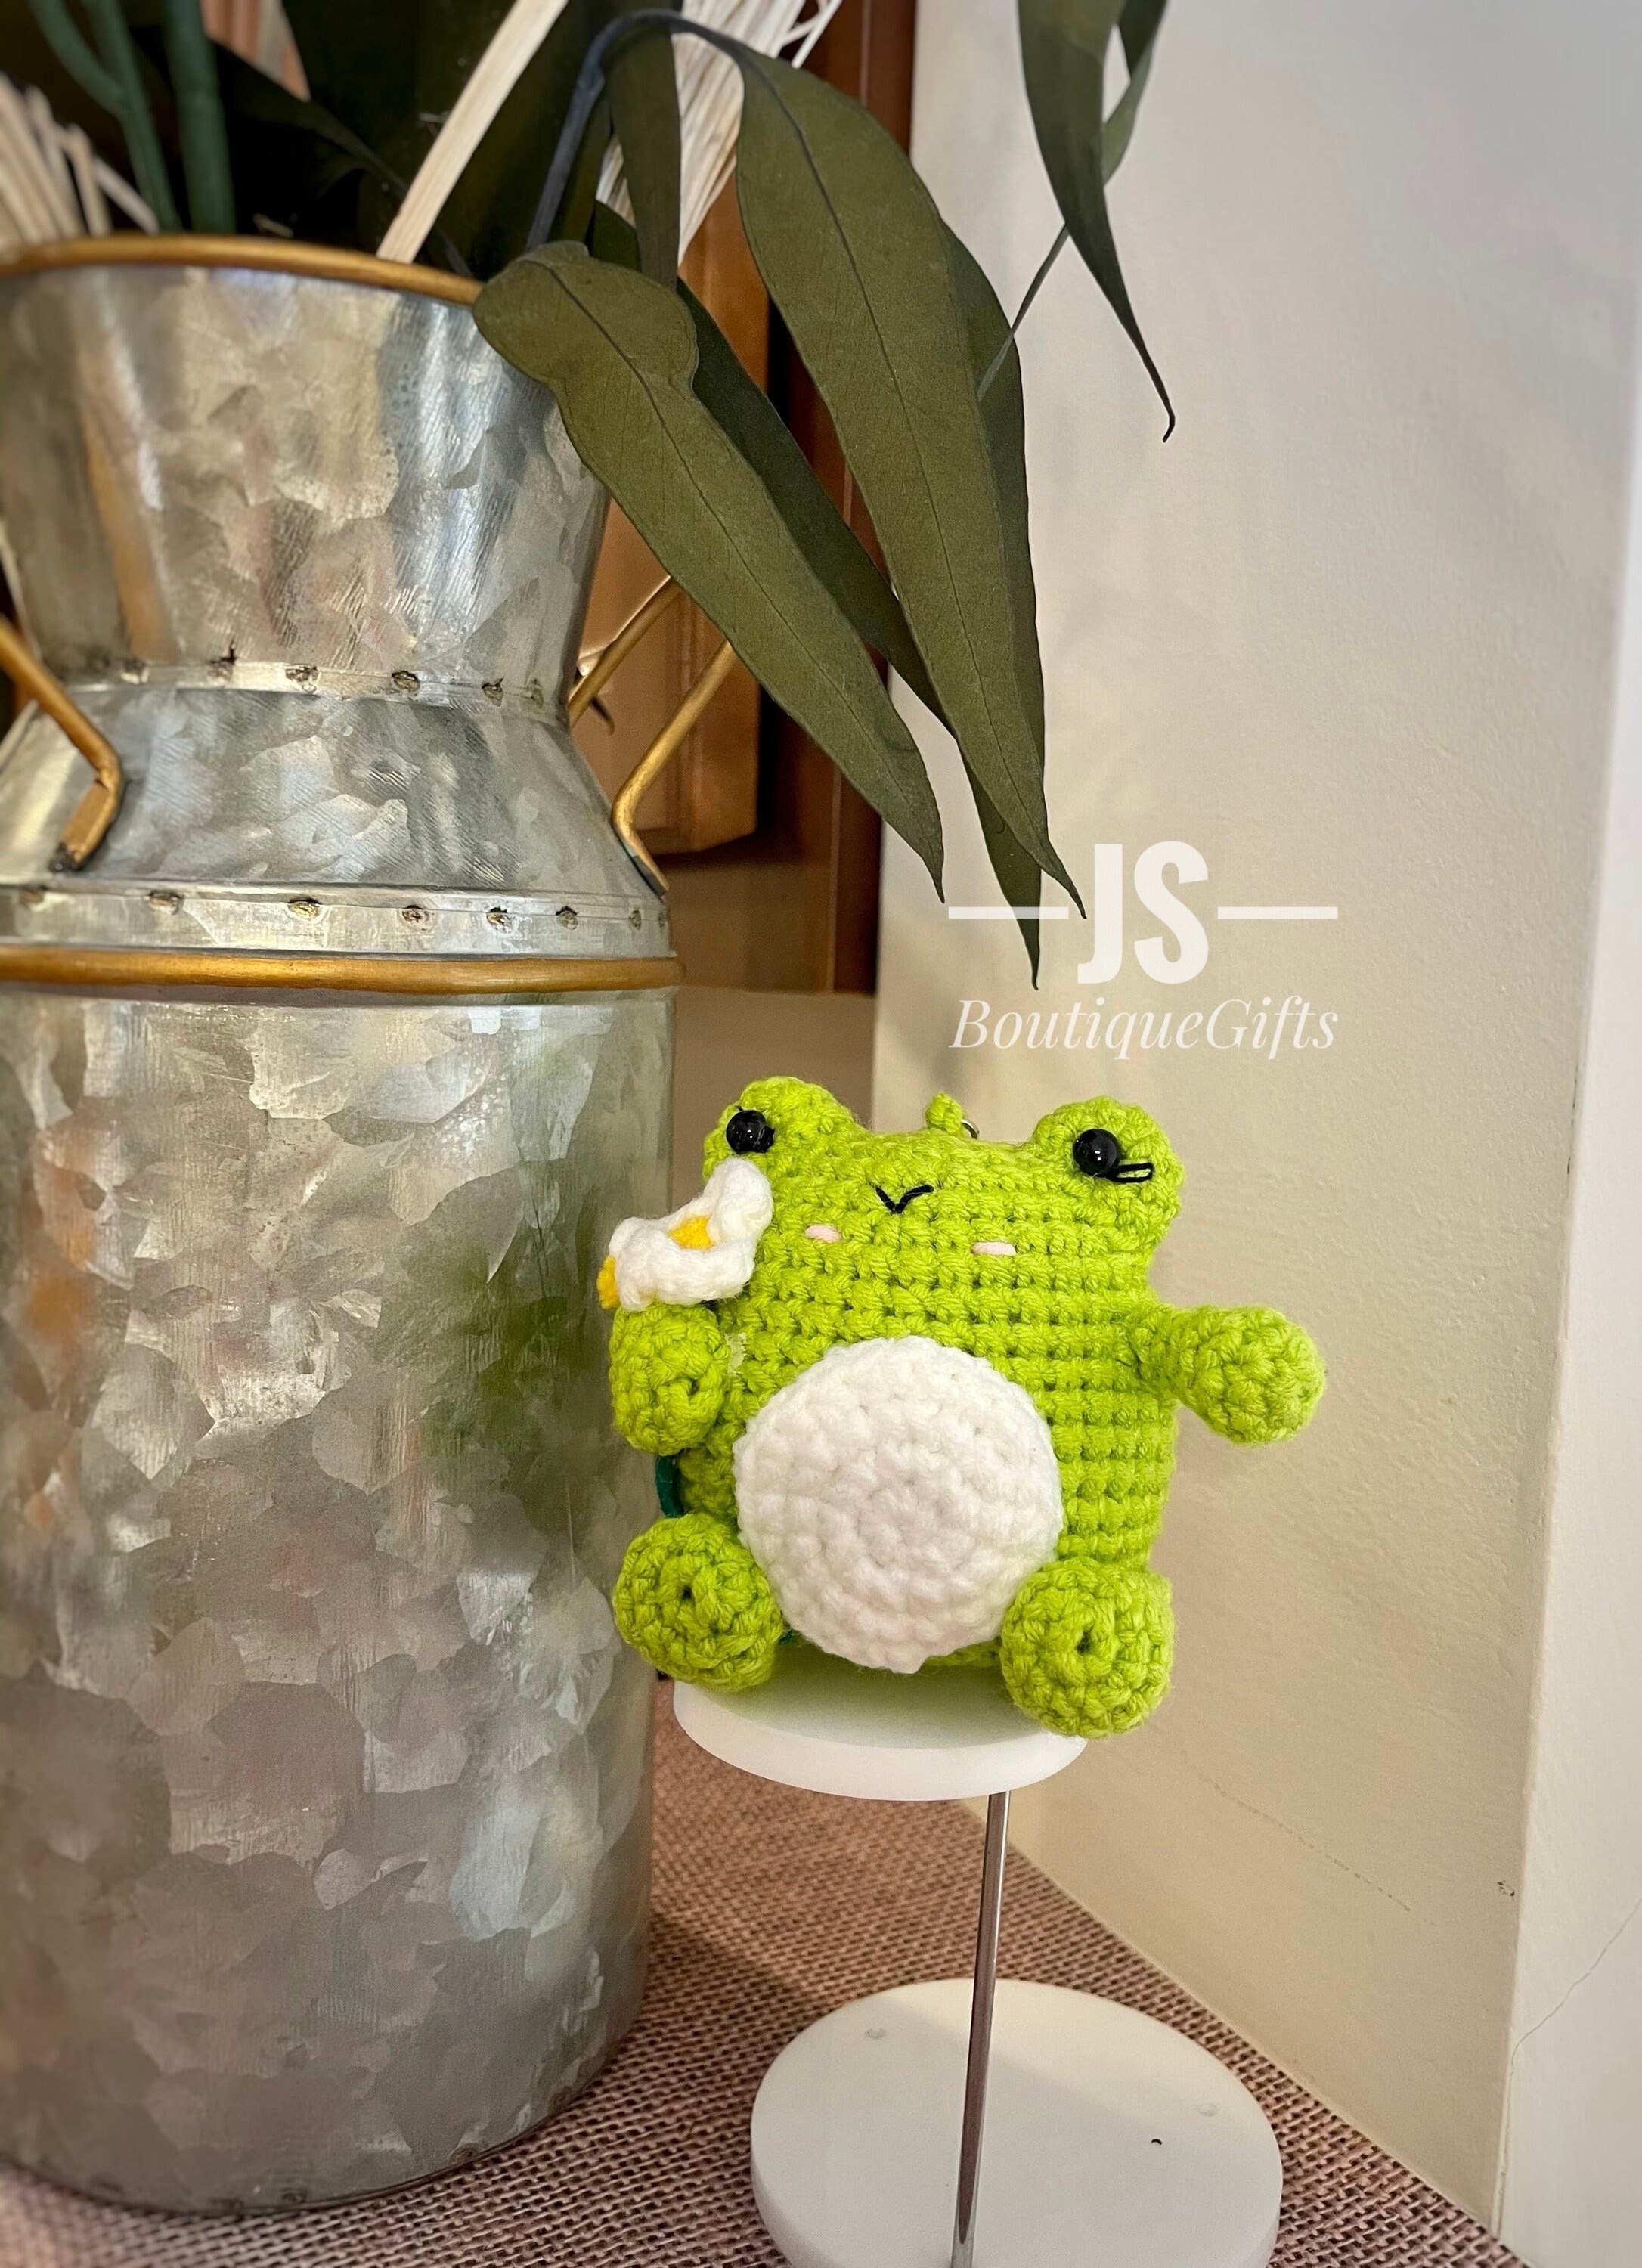 Cute Car Accessories Mirror Hanging Frog Charm Fruit Decor Flower